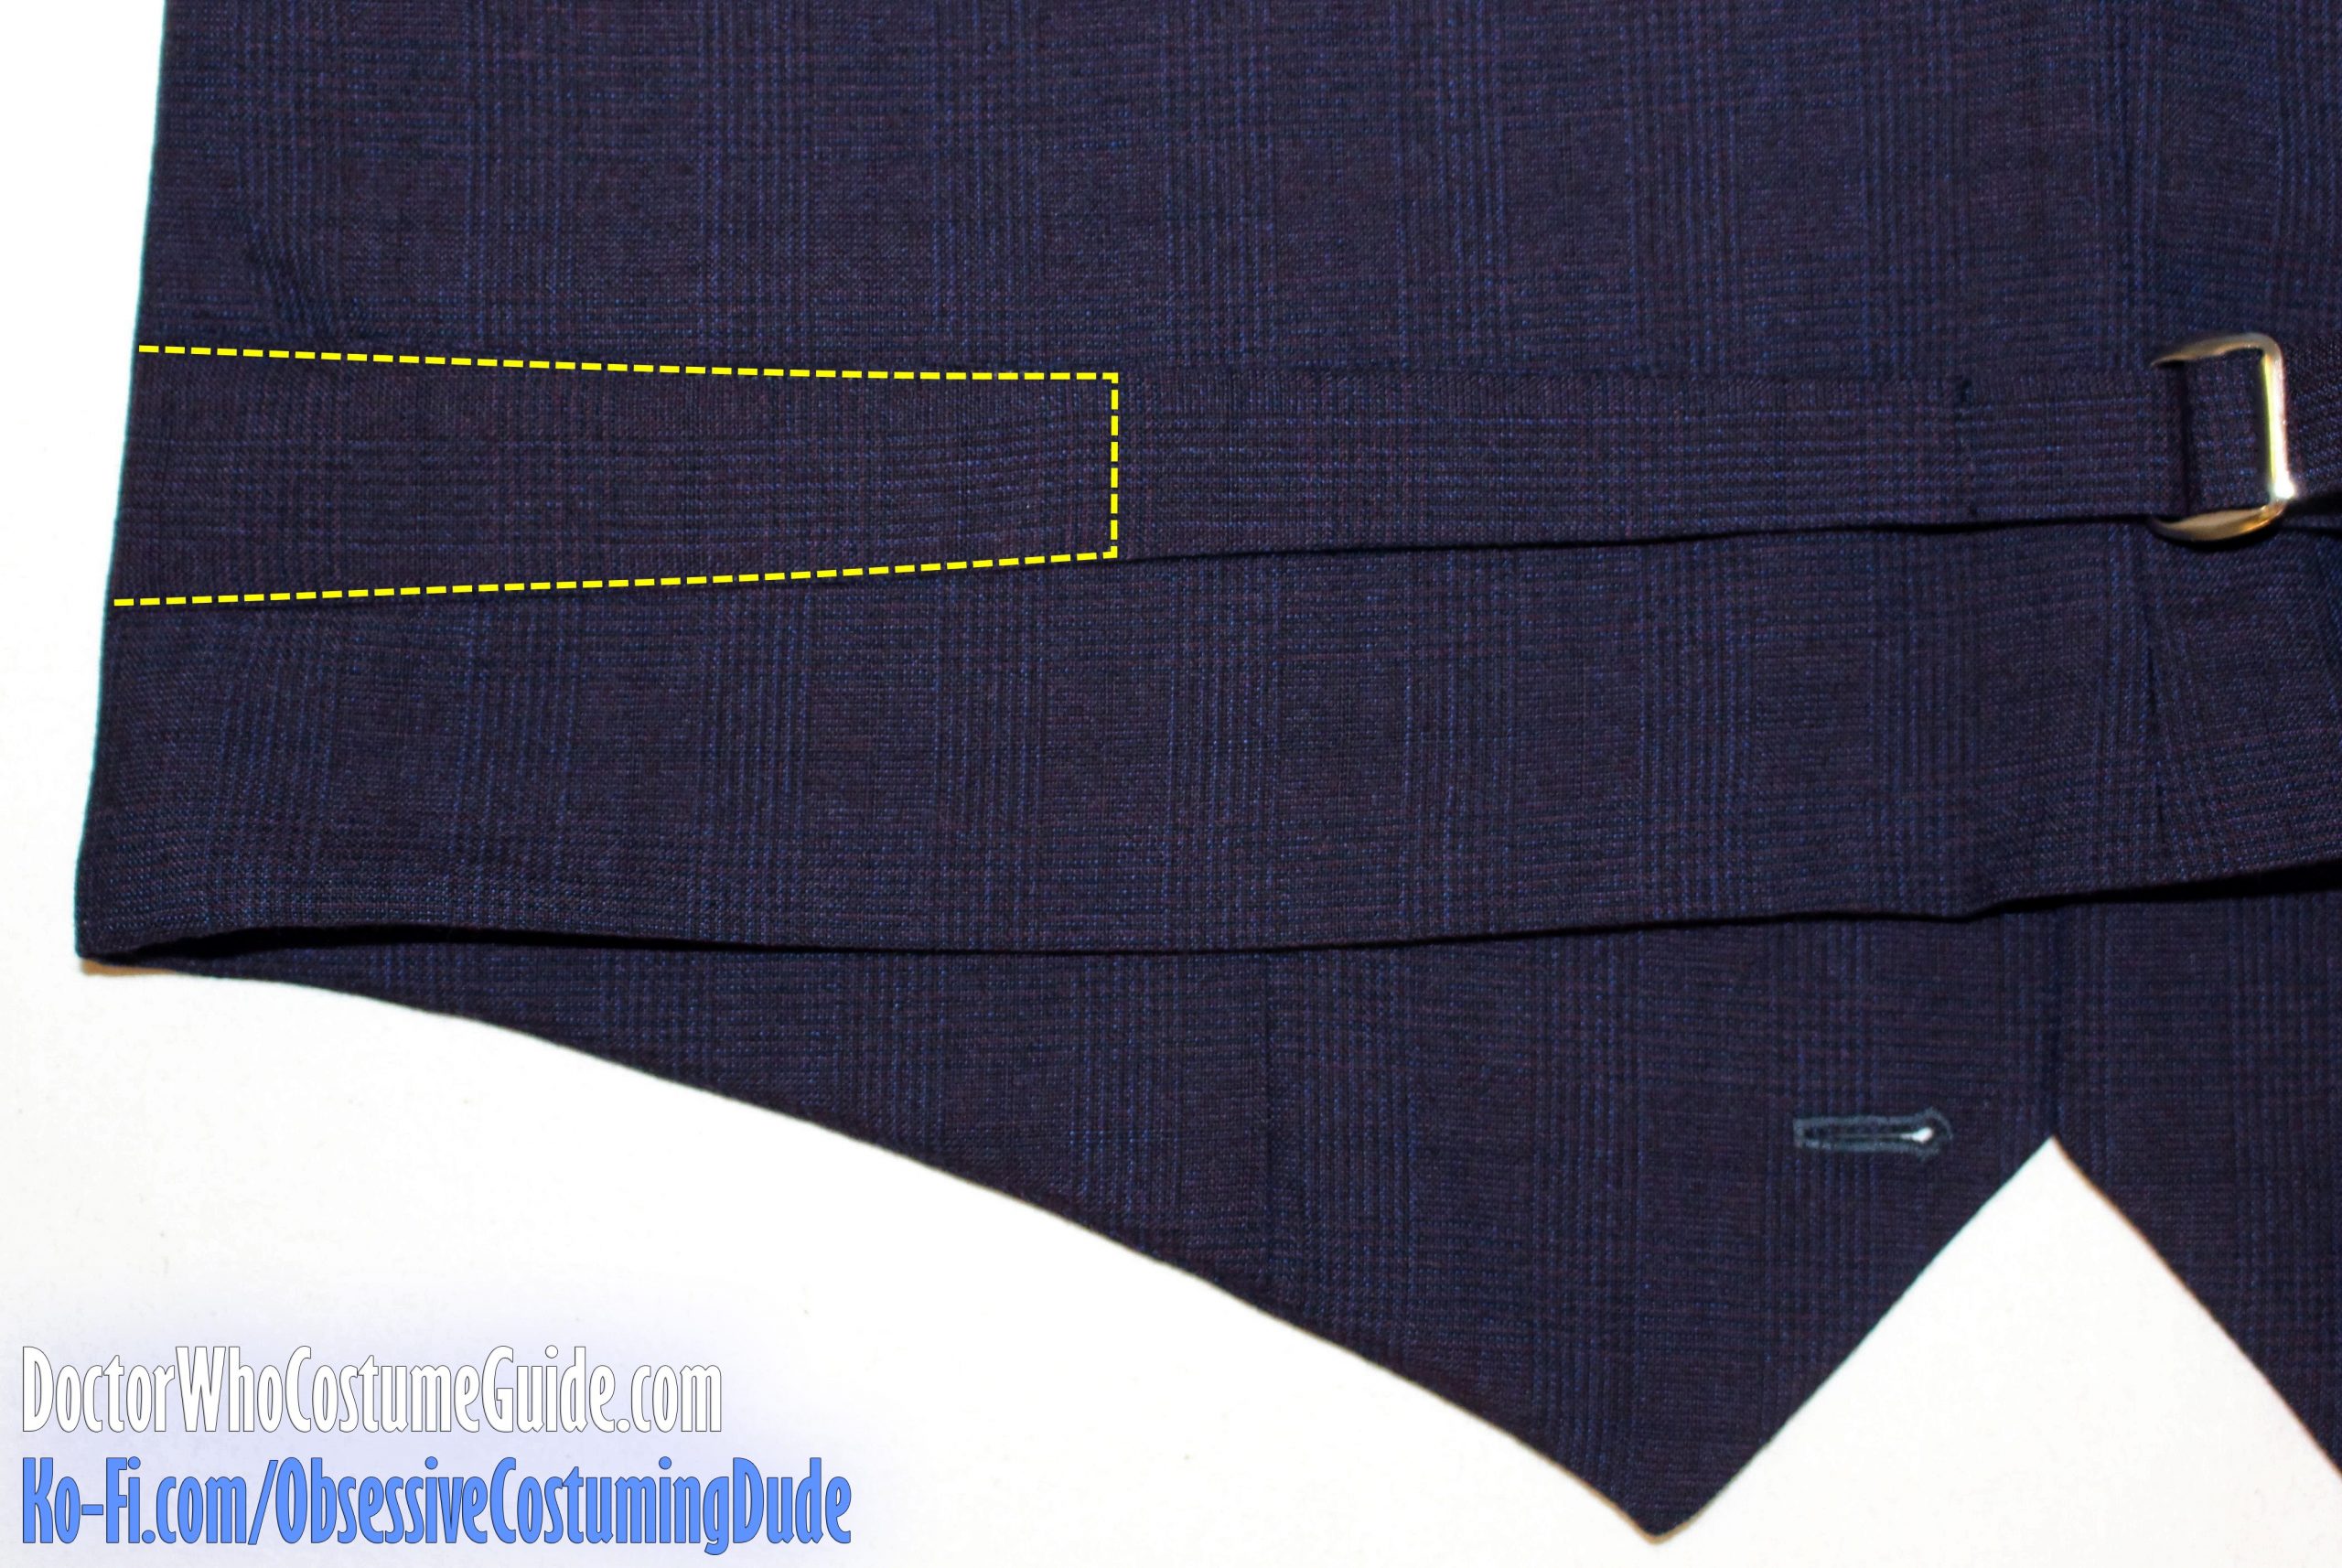 11th Doctor "anniversary" waistcoat sewing tutorial